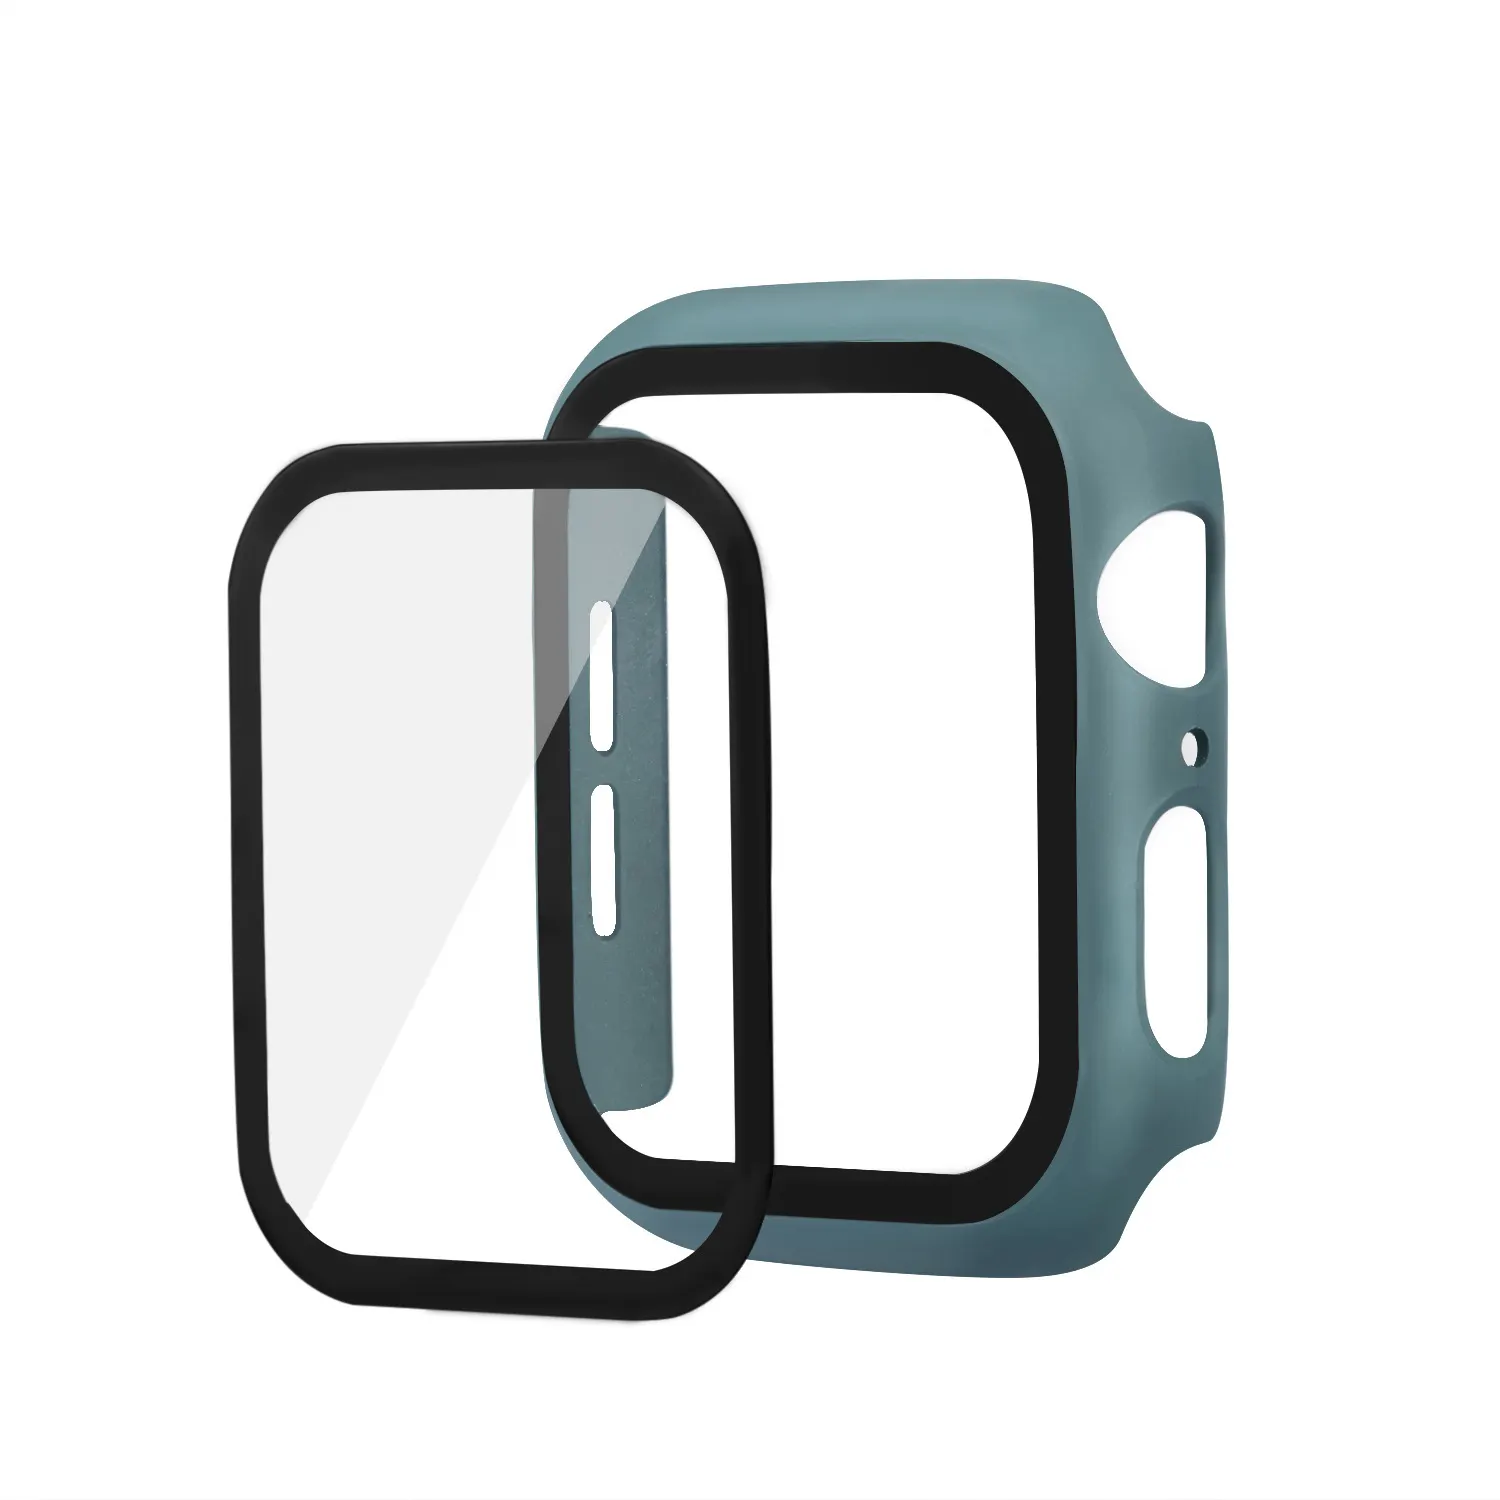 Watch case Tempered Glass For Apple Watch 5 3 4 band 42mm 38mm protector case cover bumper for apple watch